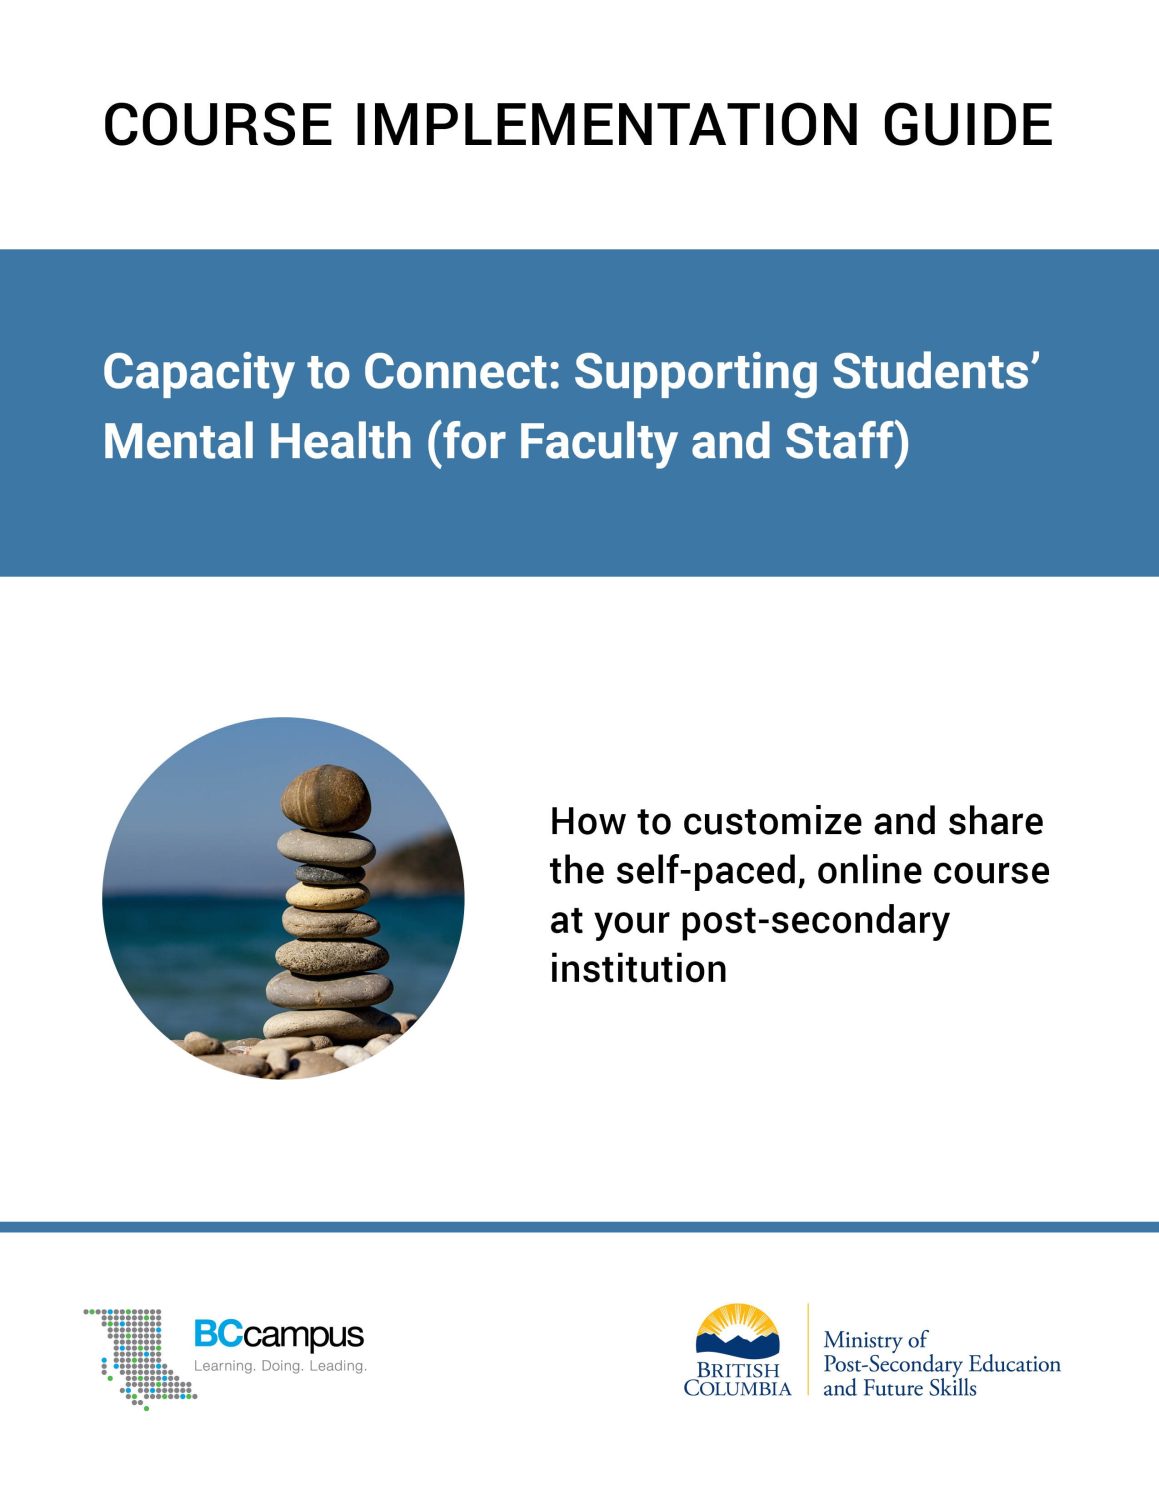 Cover image for Course Implementation Guide for Capacity to Connect: Supporting Students’ Mental Health (for Faculty and Staff)